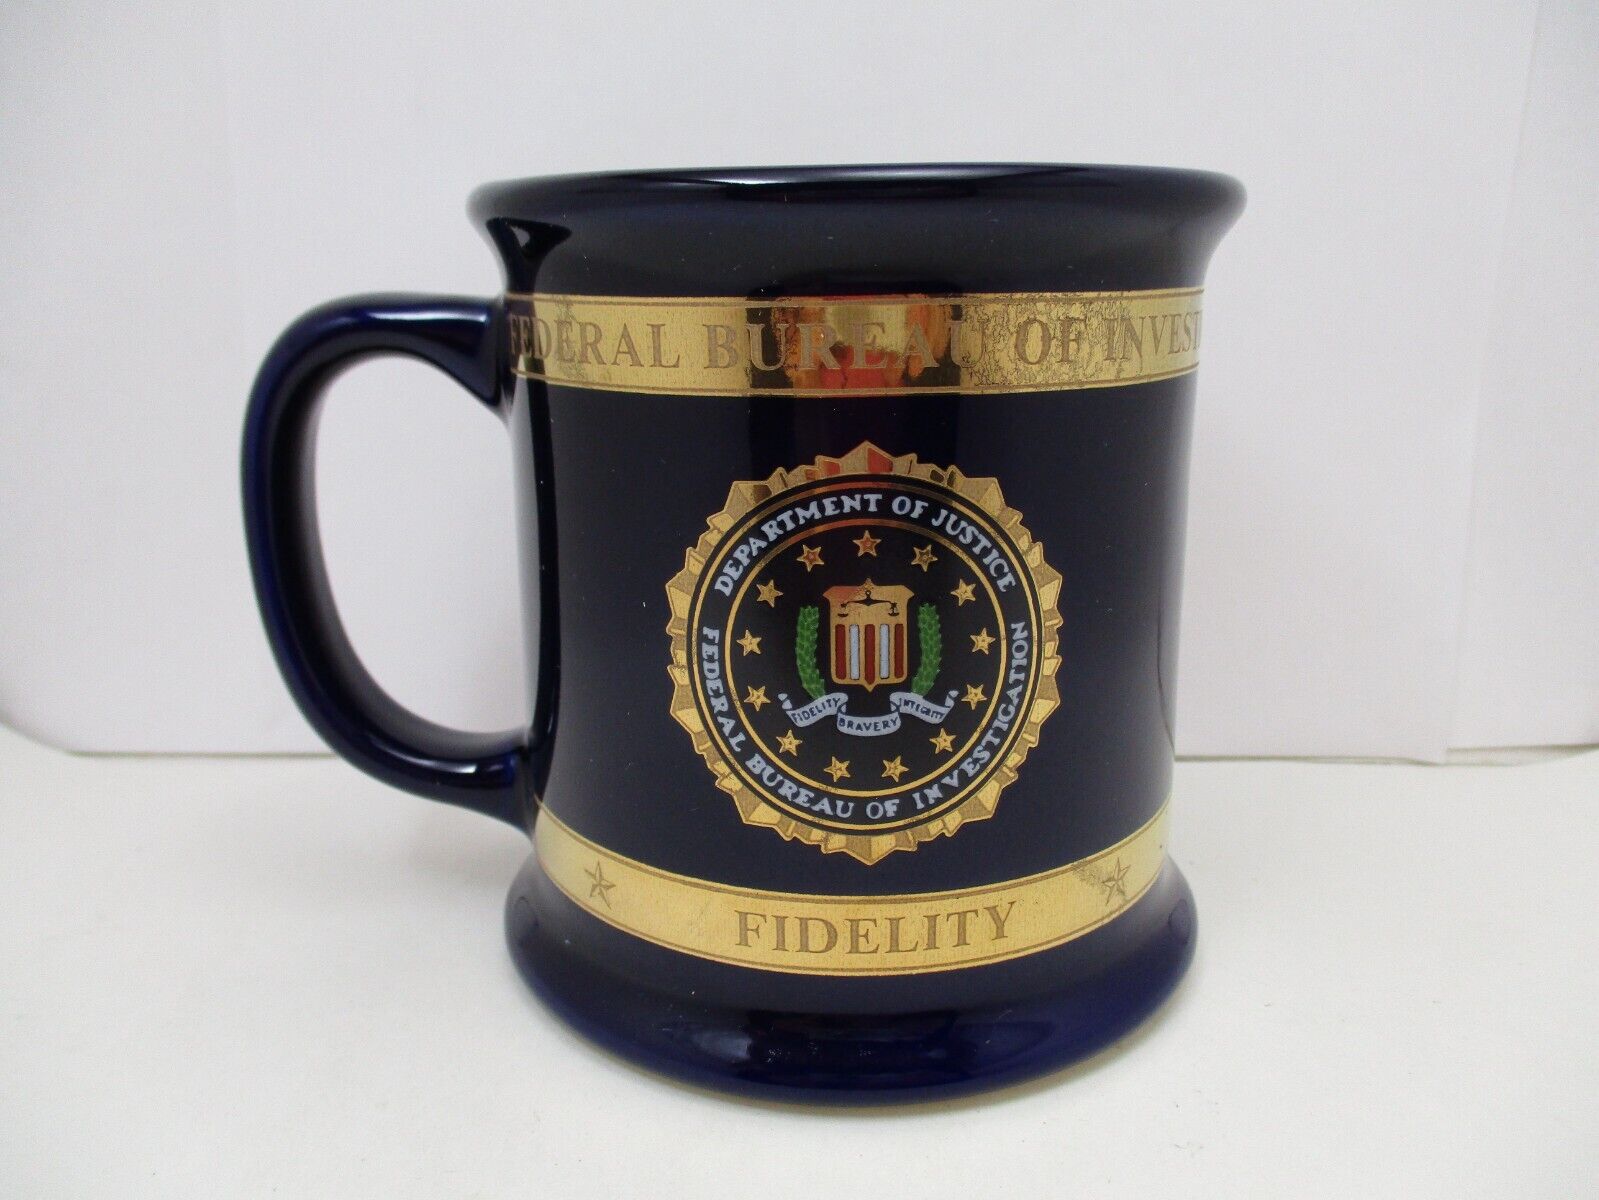 F.B.I Department of Justice Coffee Mug / Cup Heraldry of the FBI Seal Integrity